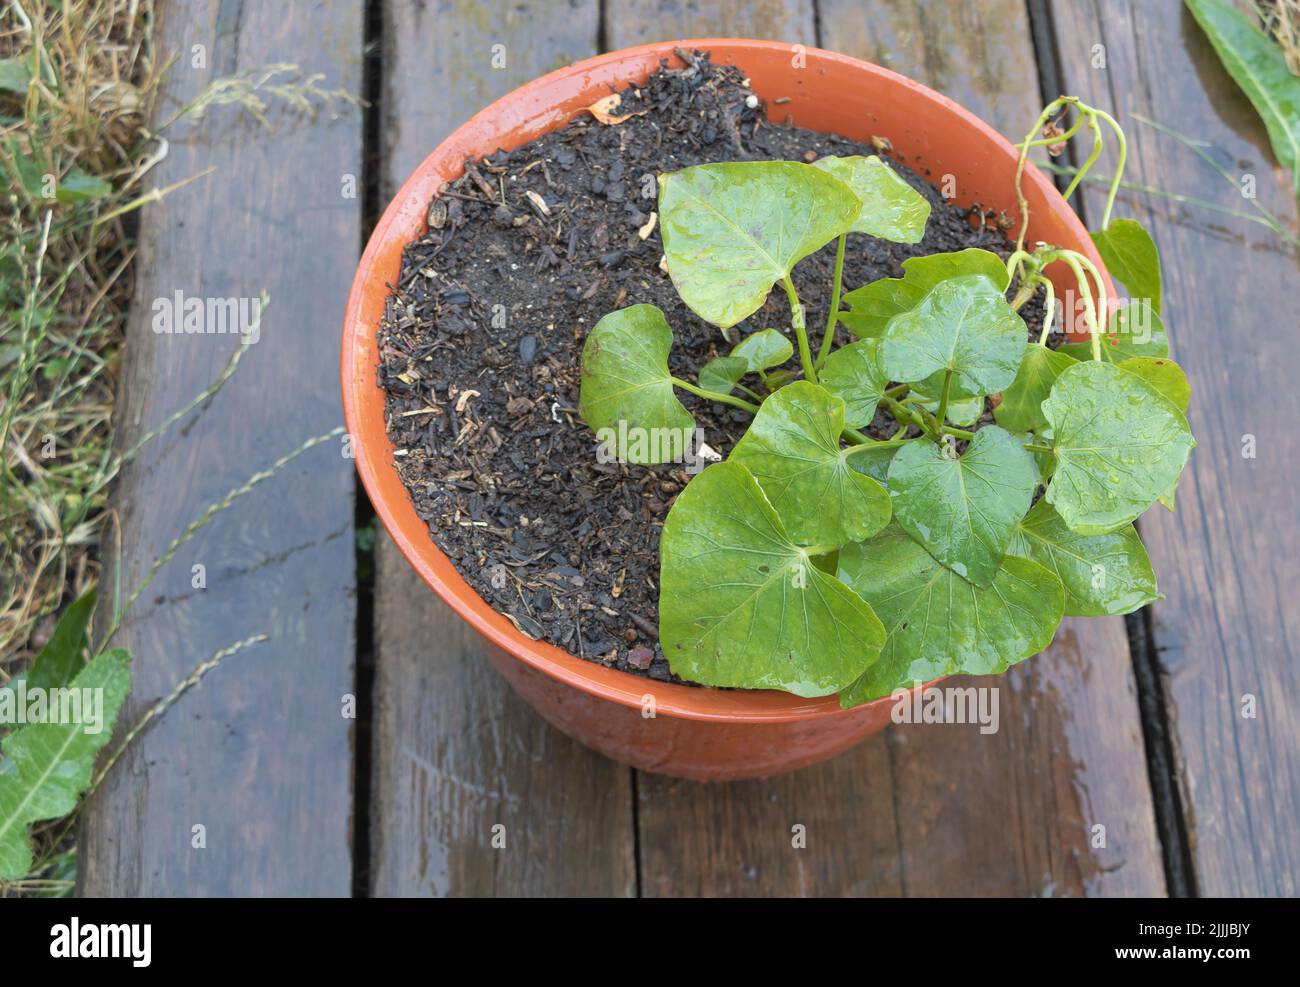 A sweet potato plant in a container after a rain Stock Photo